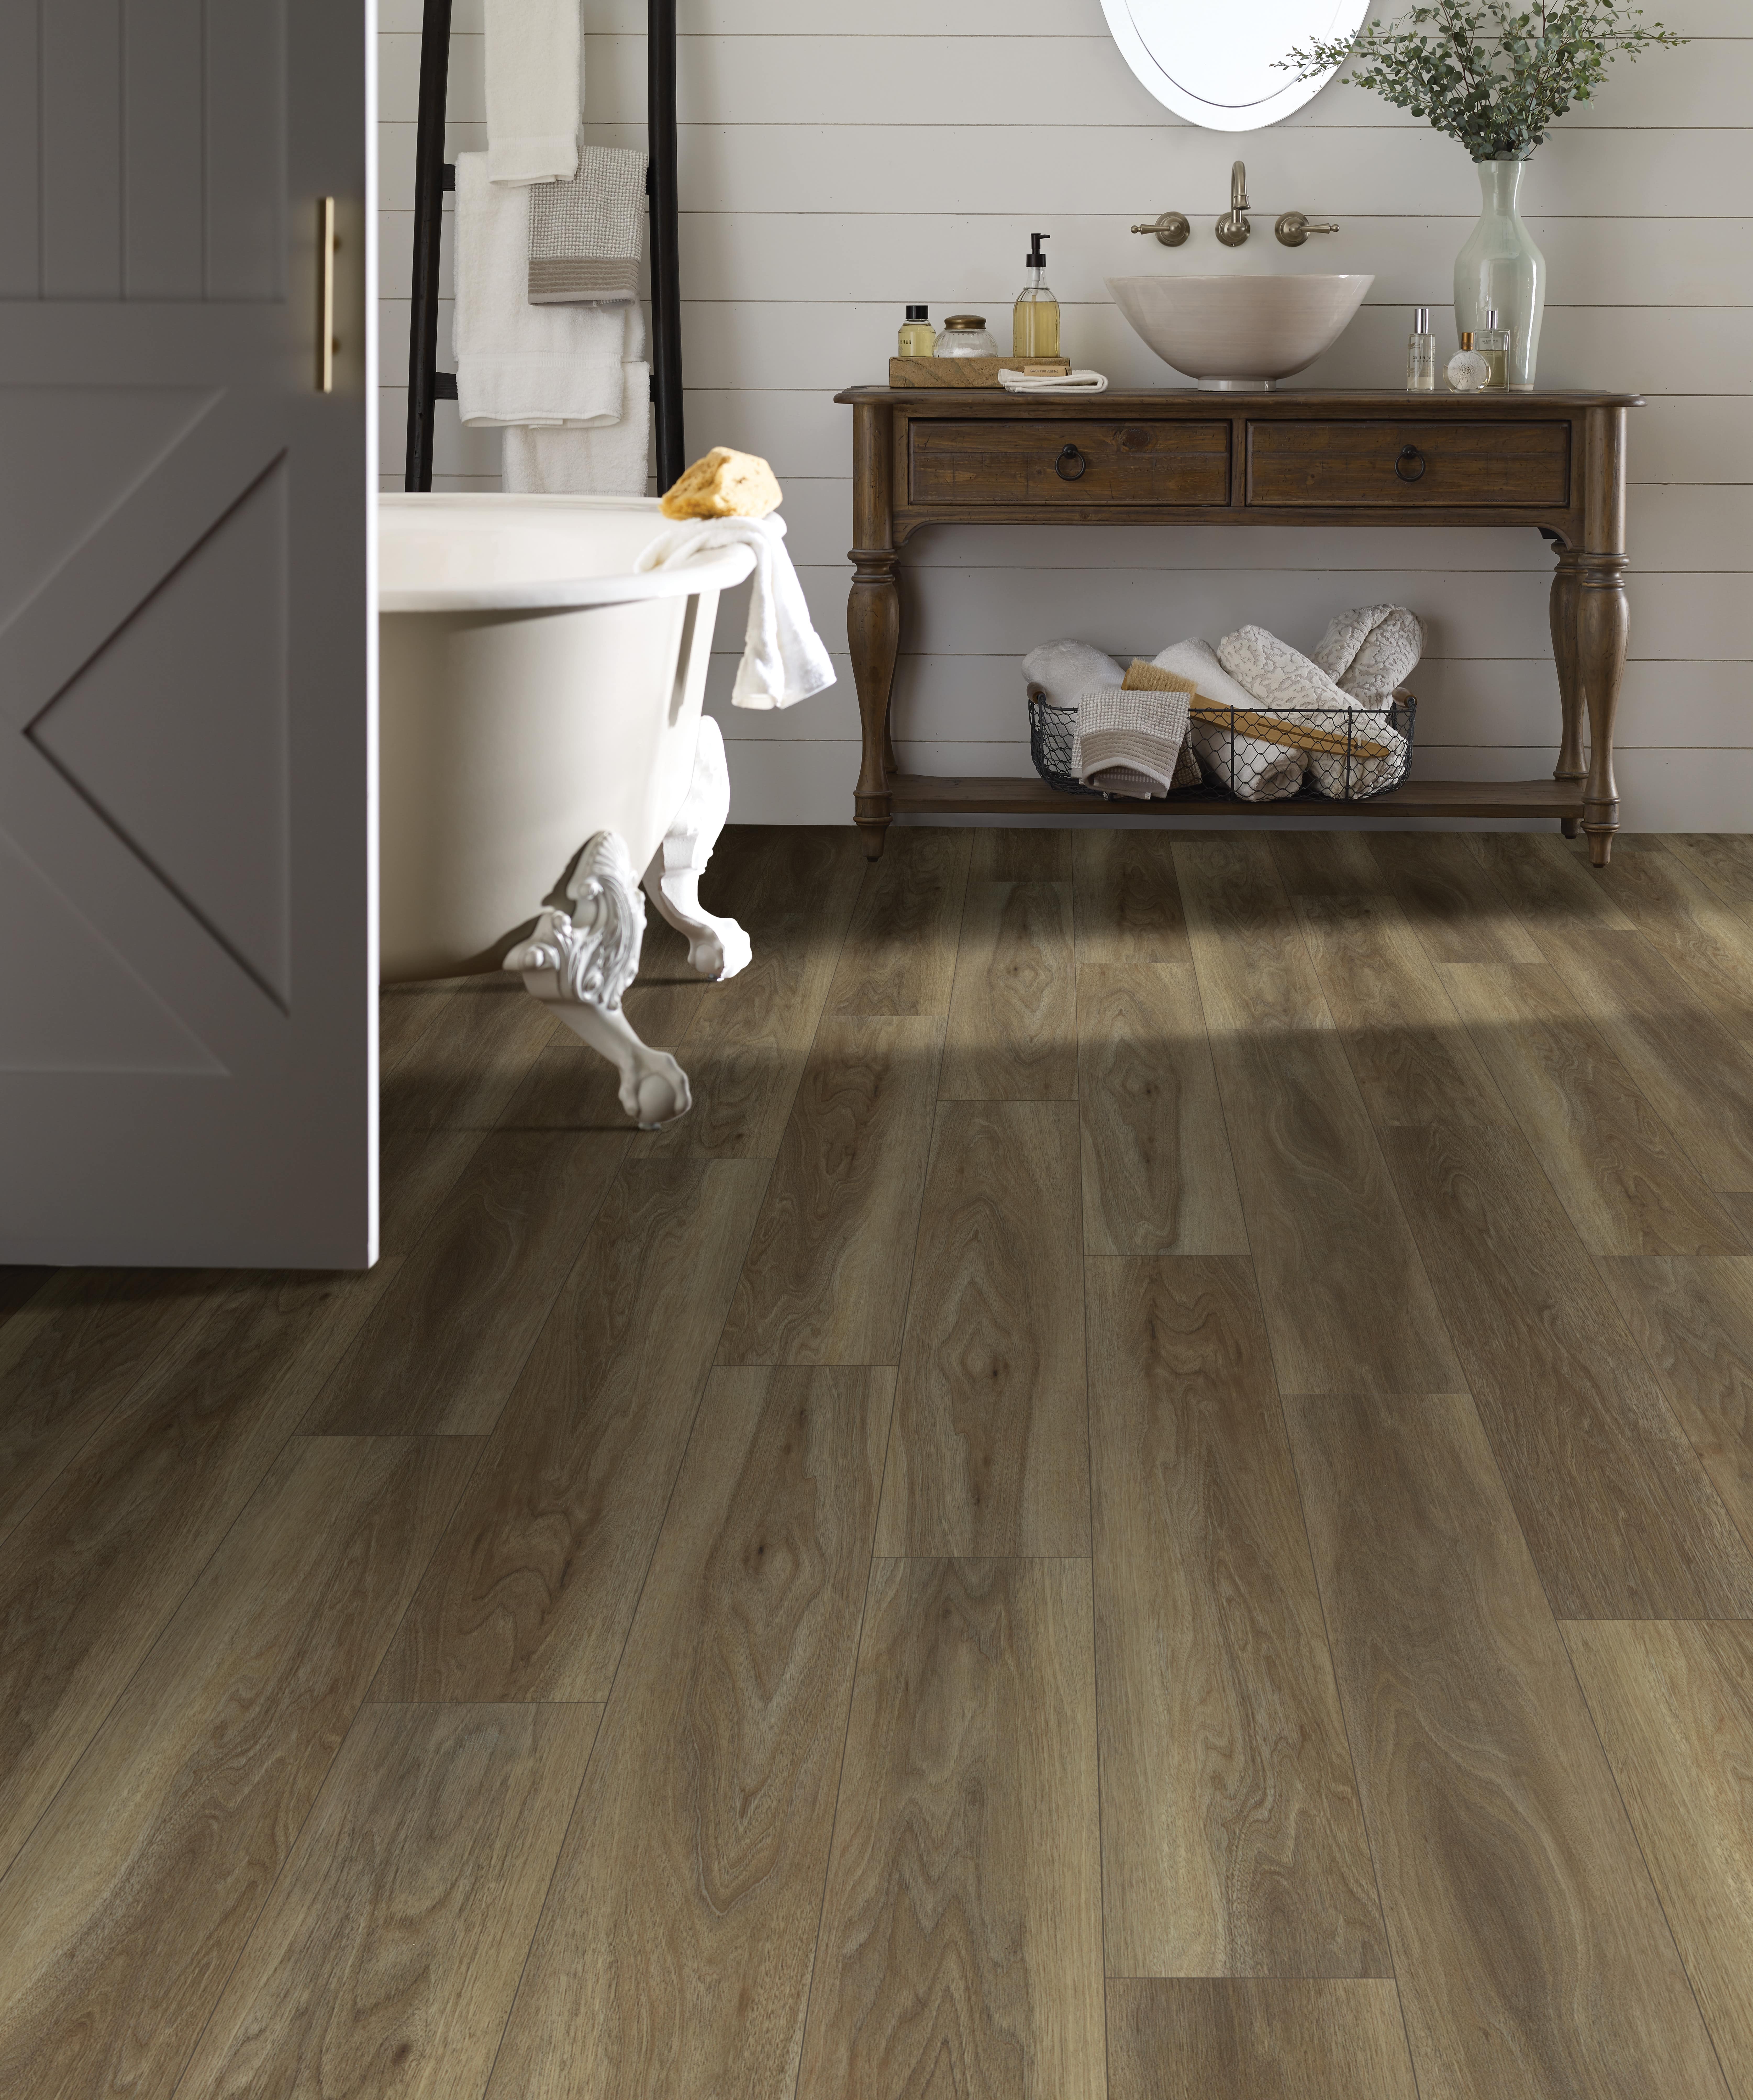 Wood Floor Bathrooms How To Do Them, How To Protect Laminate Flooring In Bathroom